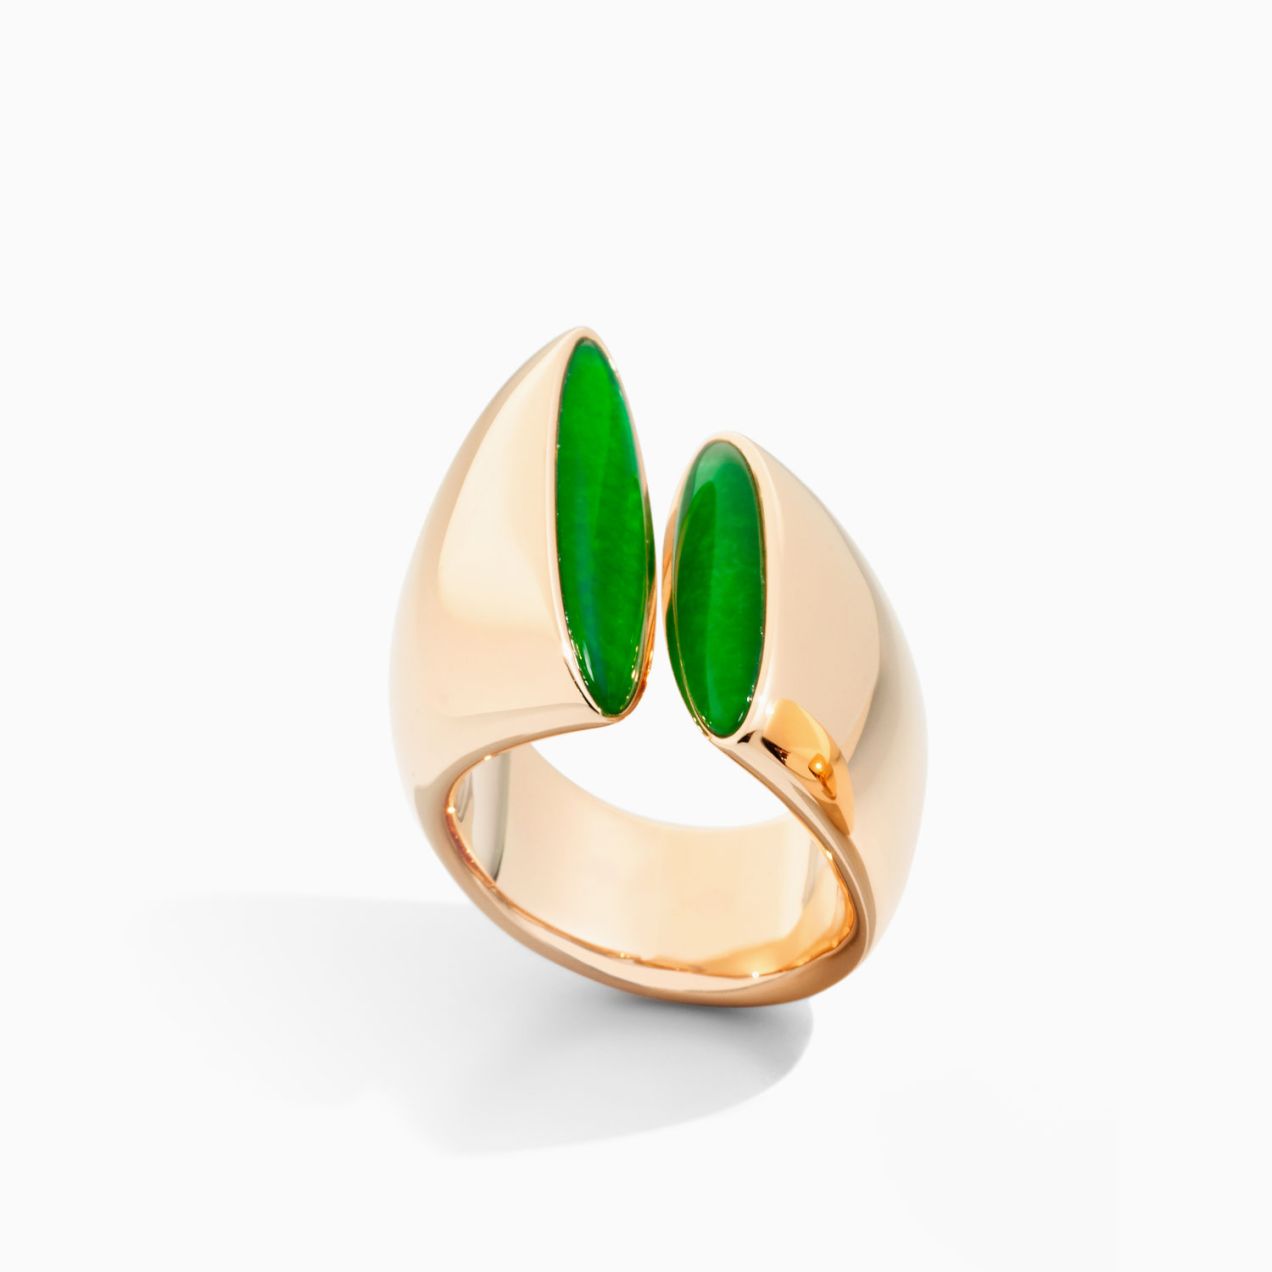 Vhernier eclisse ring in rose gold with green jade